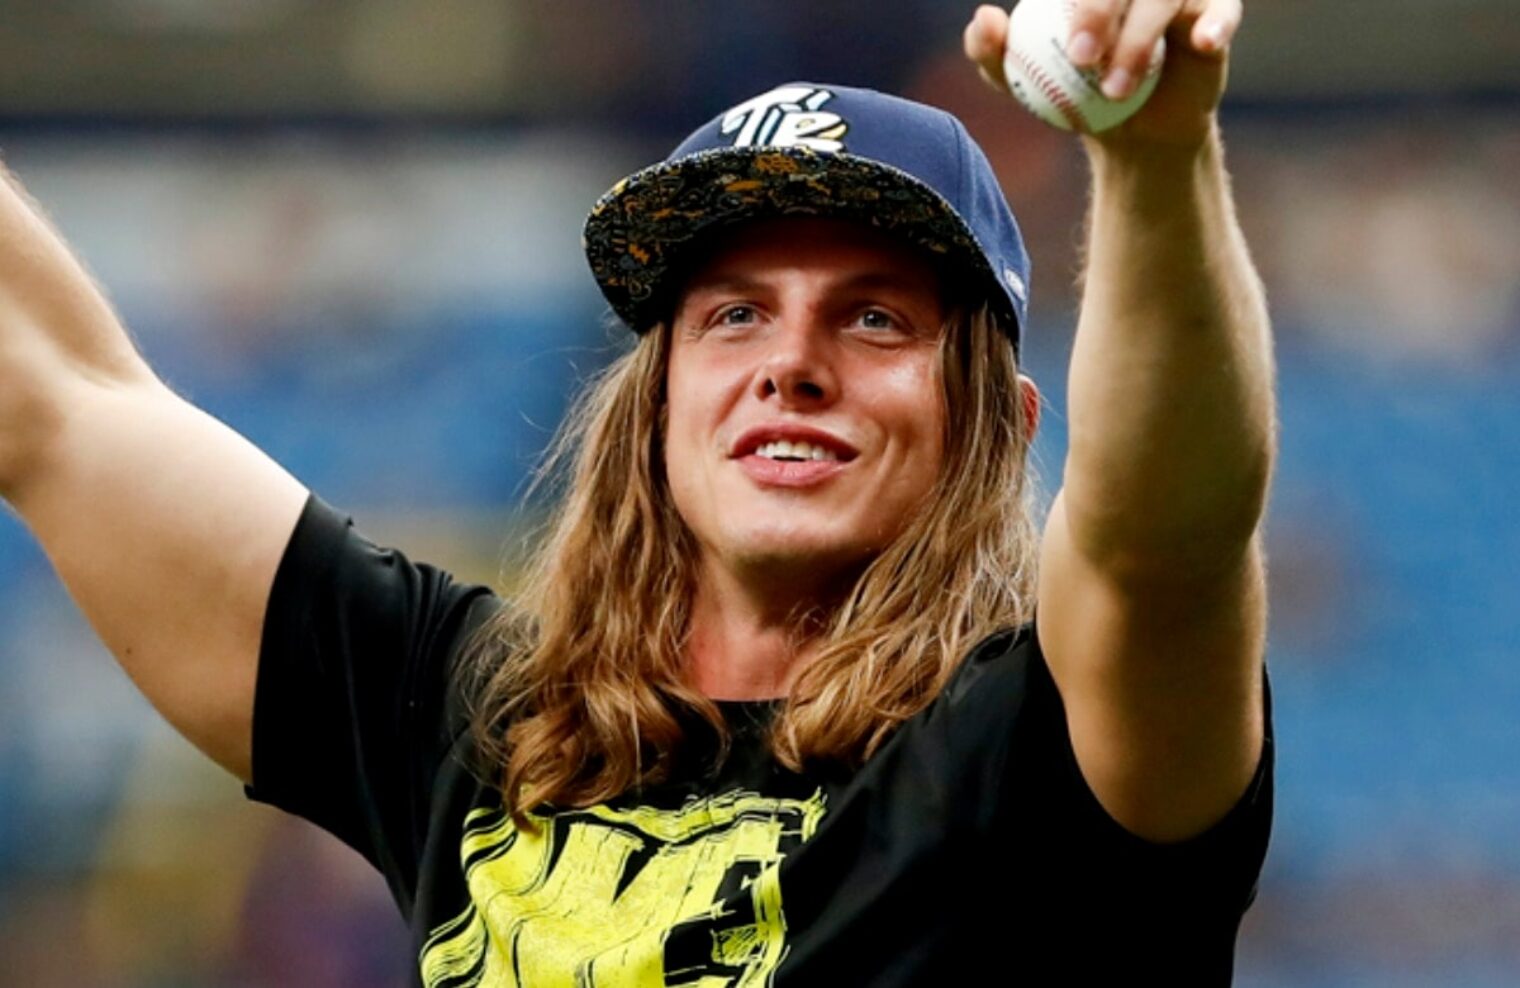 Matt Riddle’s Attorney Issues Press Release Denying Sexual Misconduct